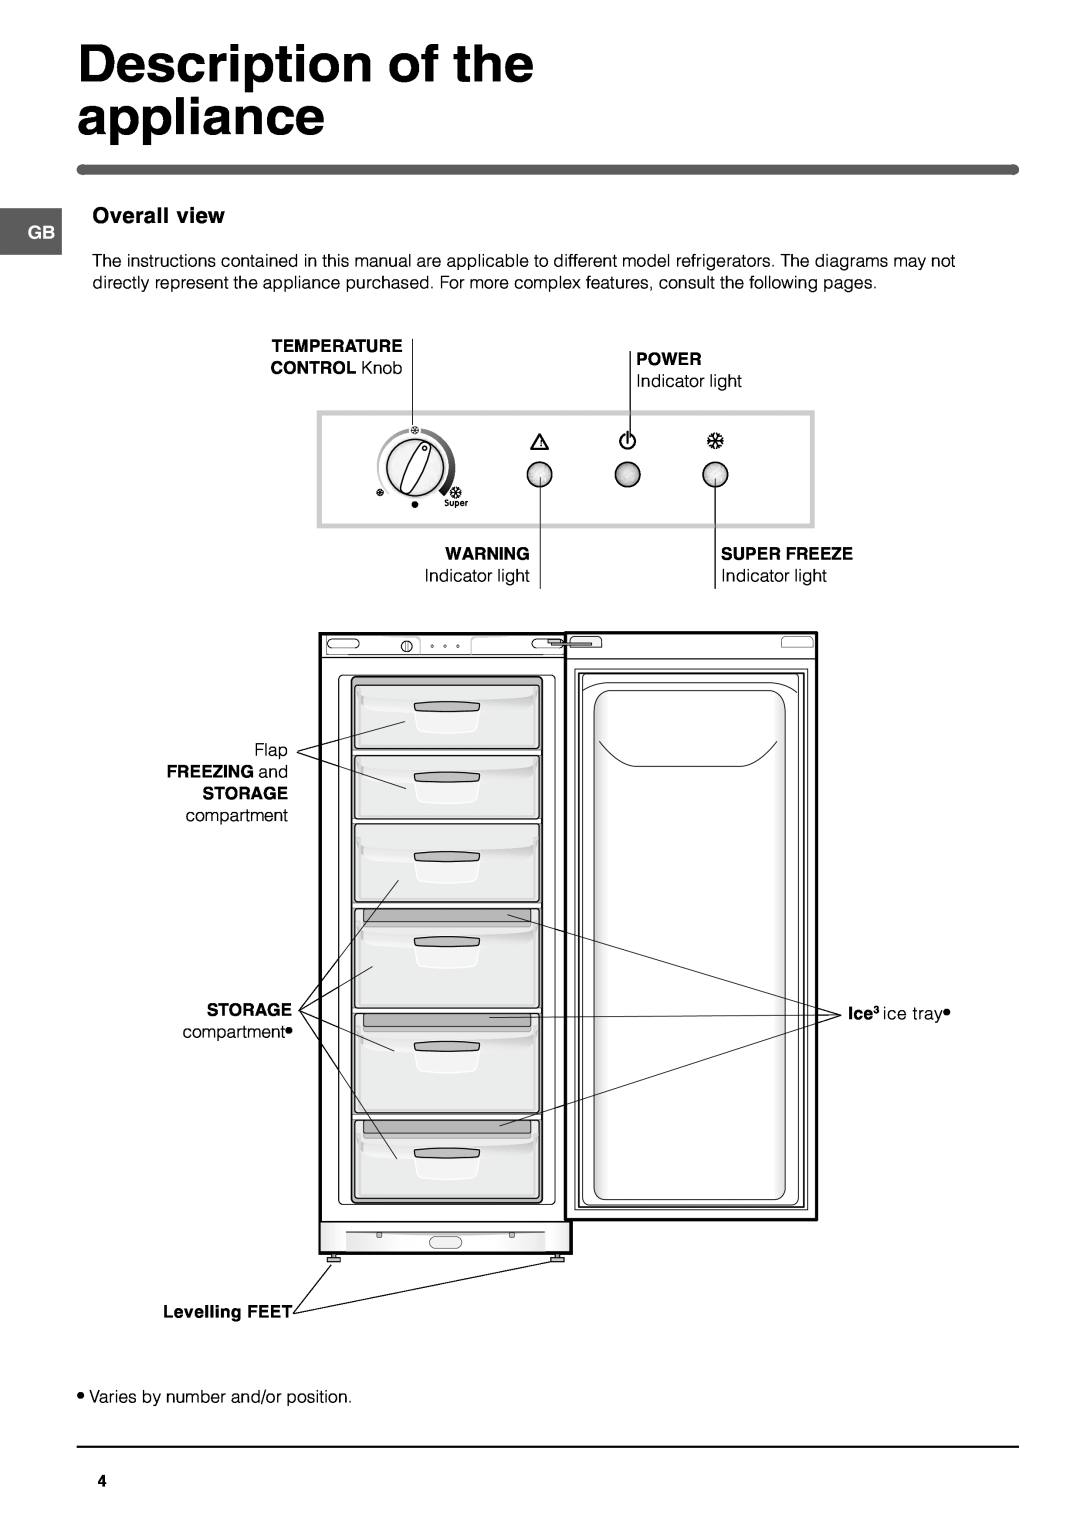 Indesit UFAN 400 manual Description of the appliance, Power, Super Freeze, FREEZING and STORAGE, Storage, Levelling FEET 